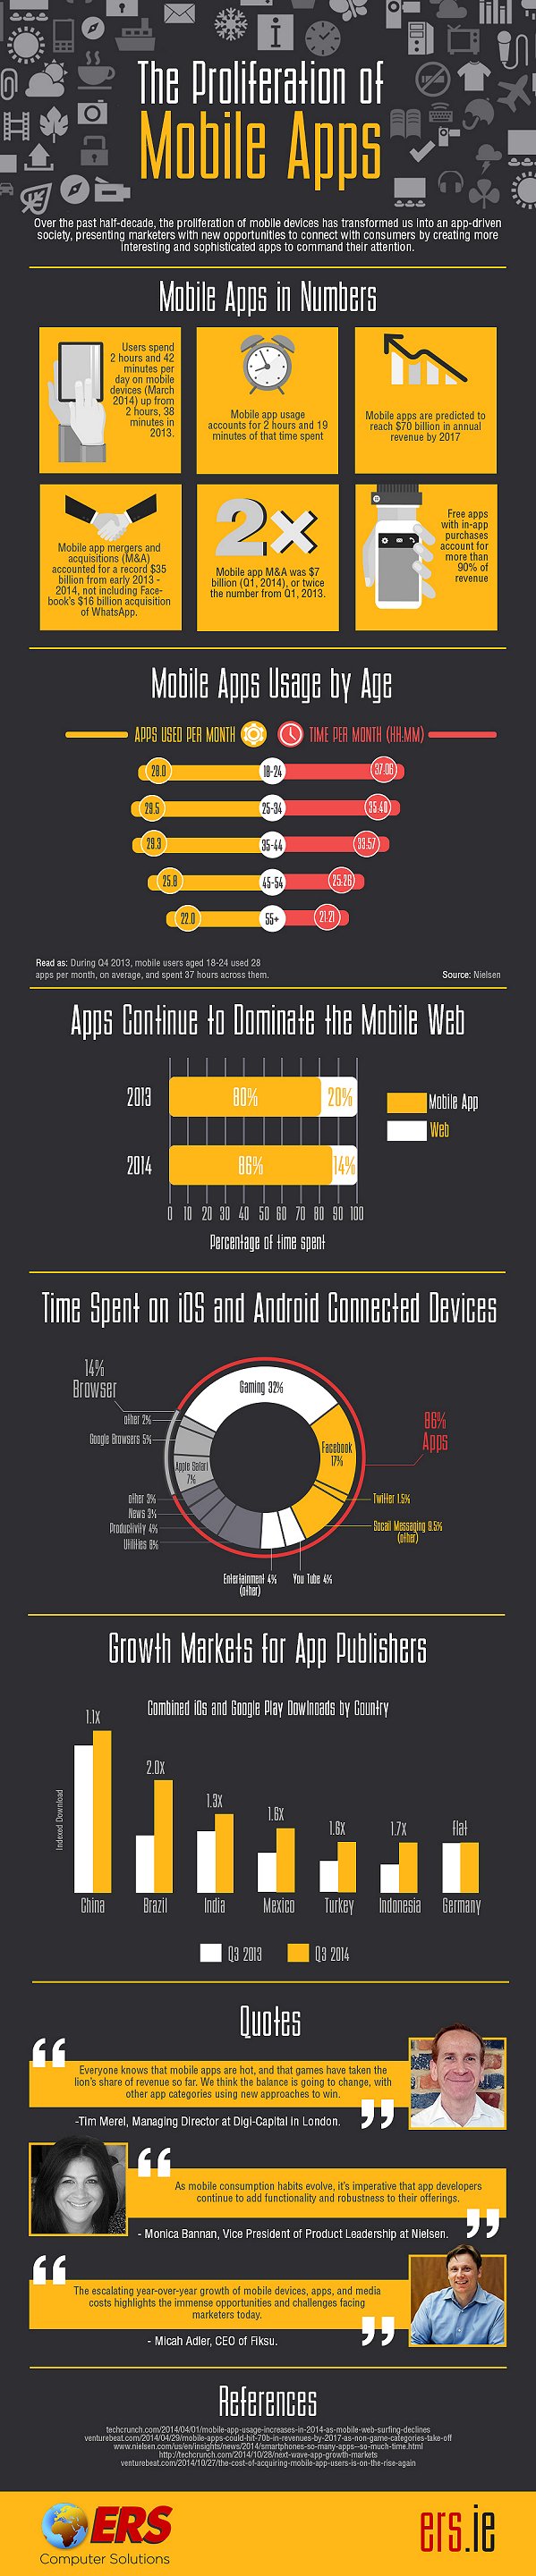 Mobile-Apps-Infographic